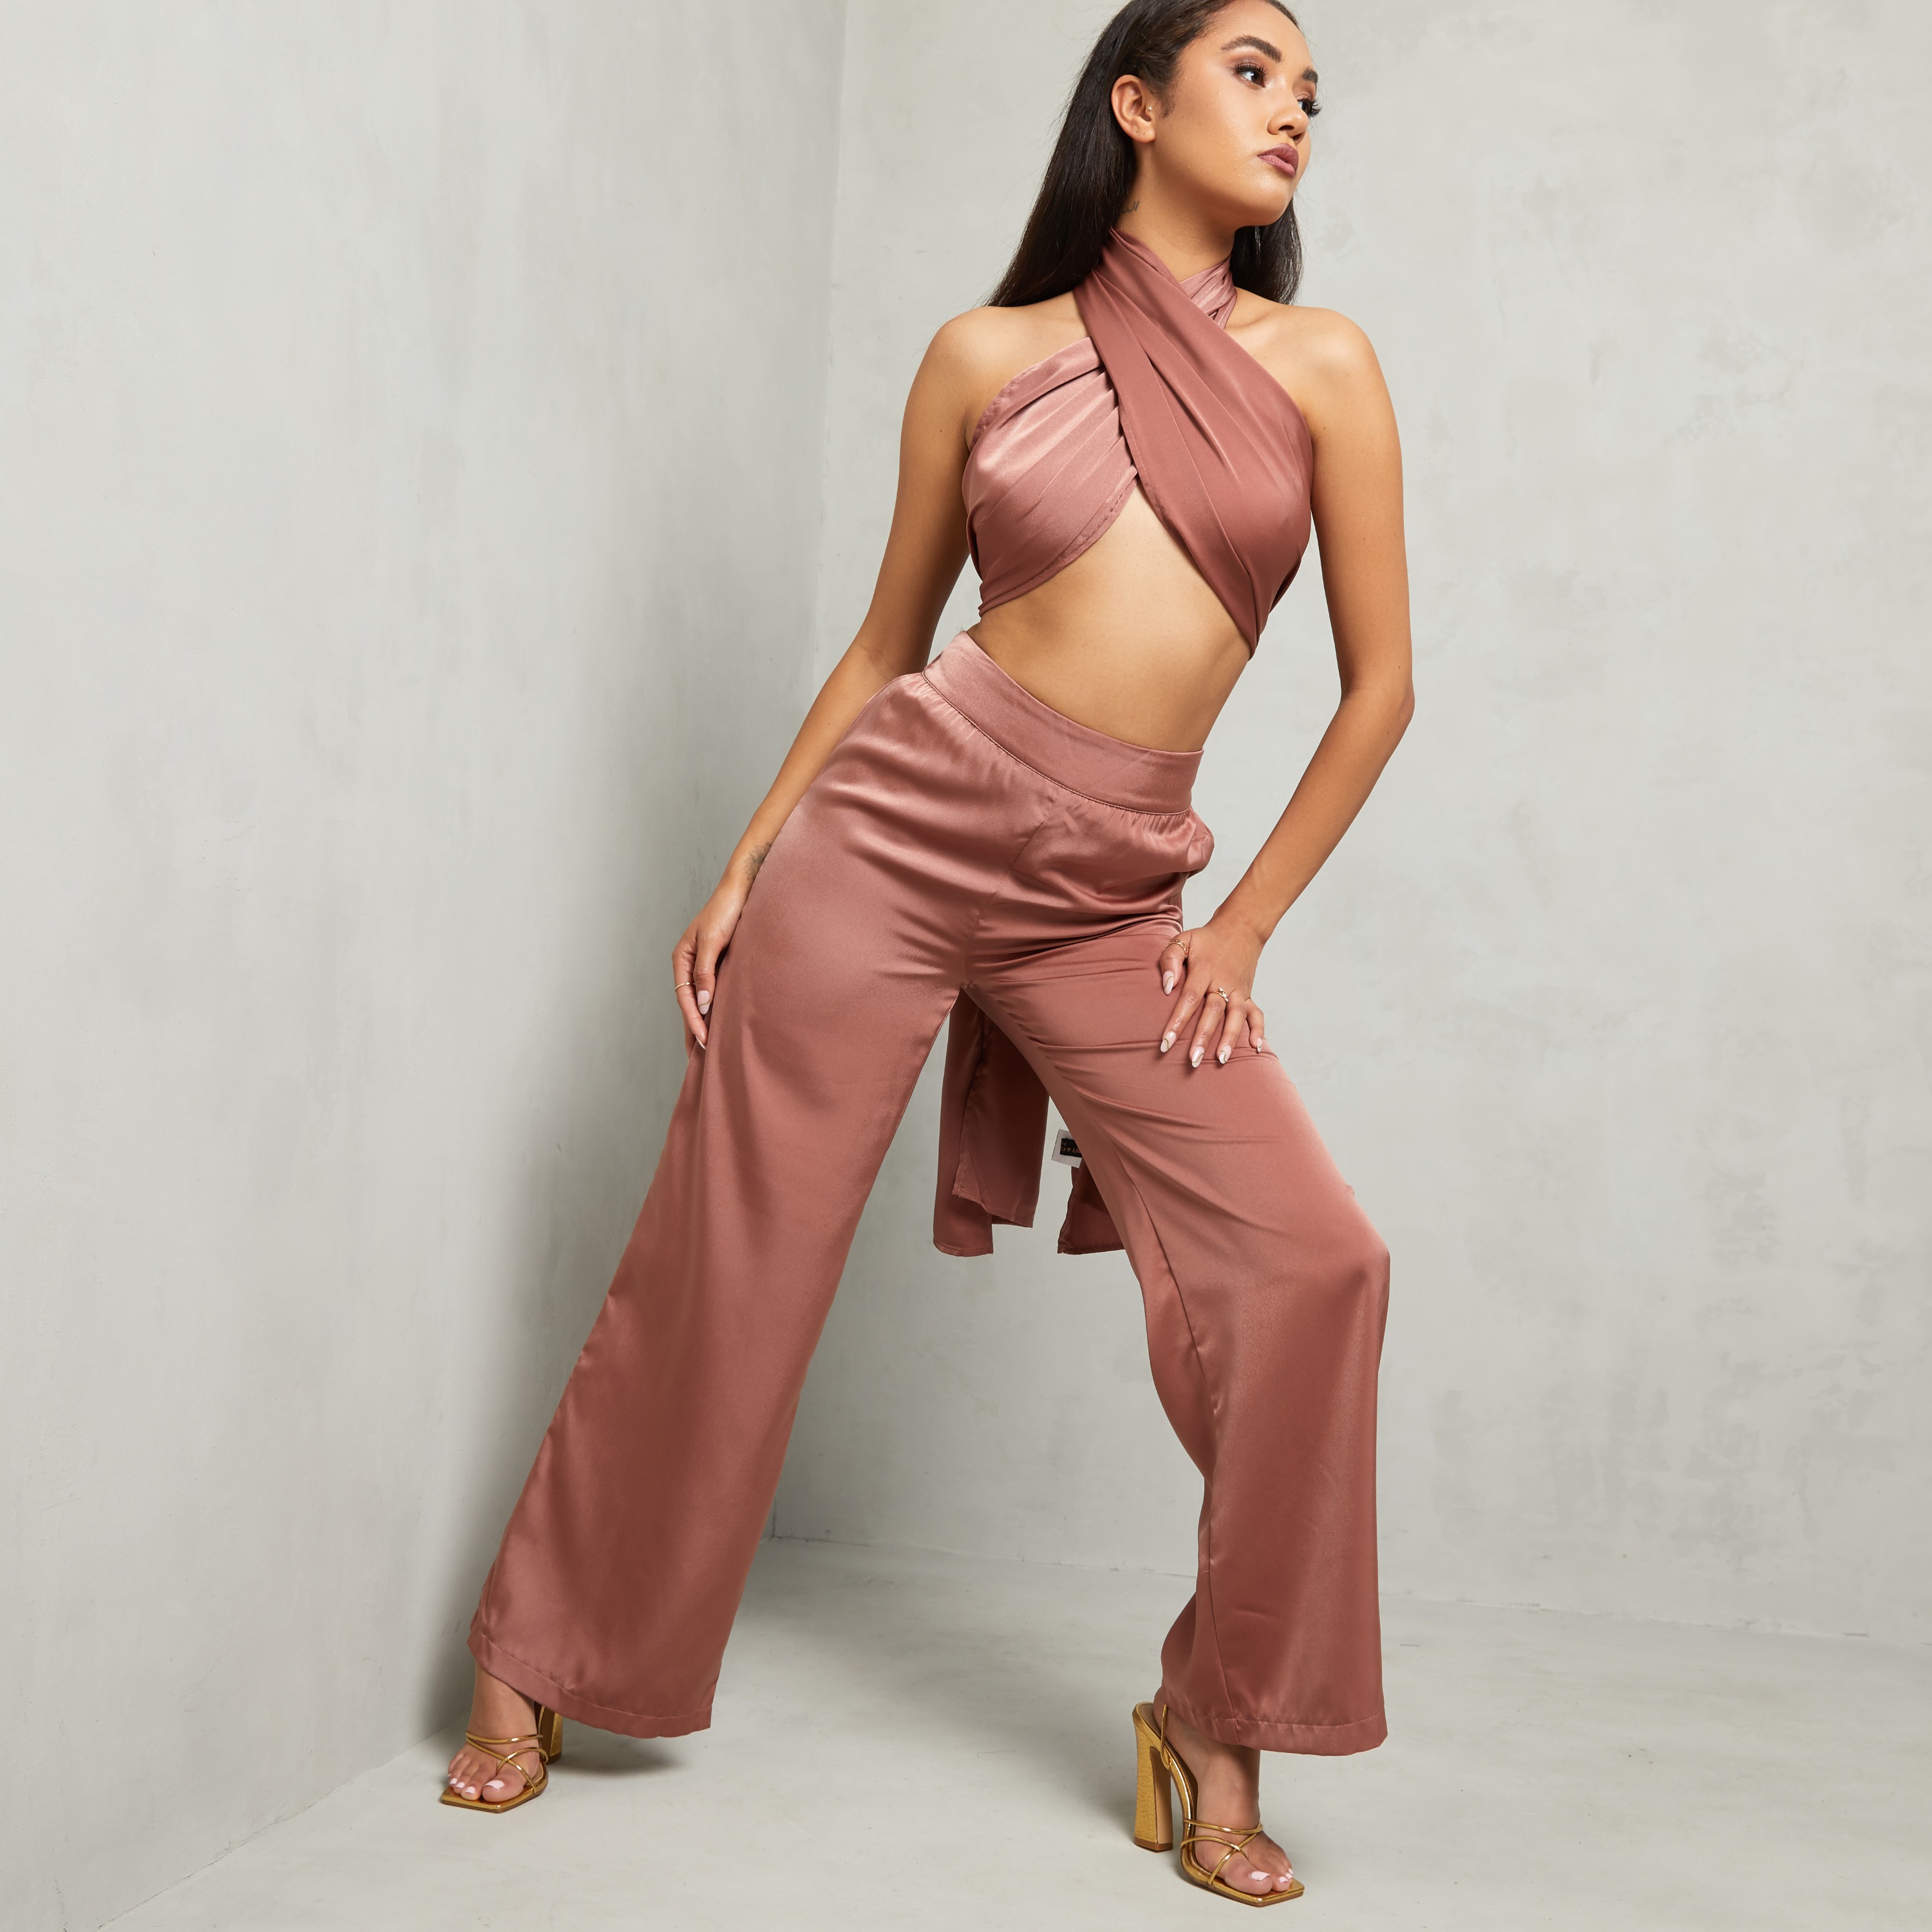 Ego Crossover top and trousers co-ord set in brown uk medium m, brown